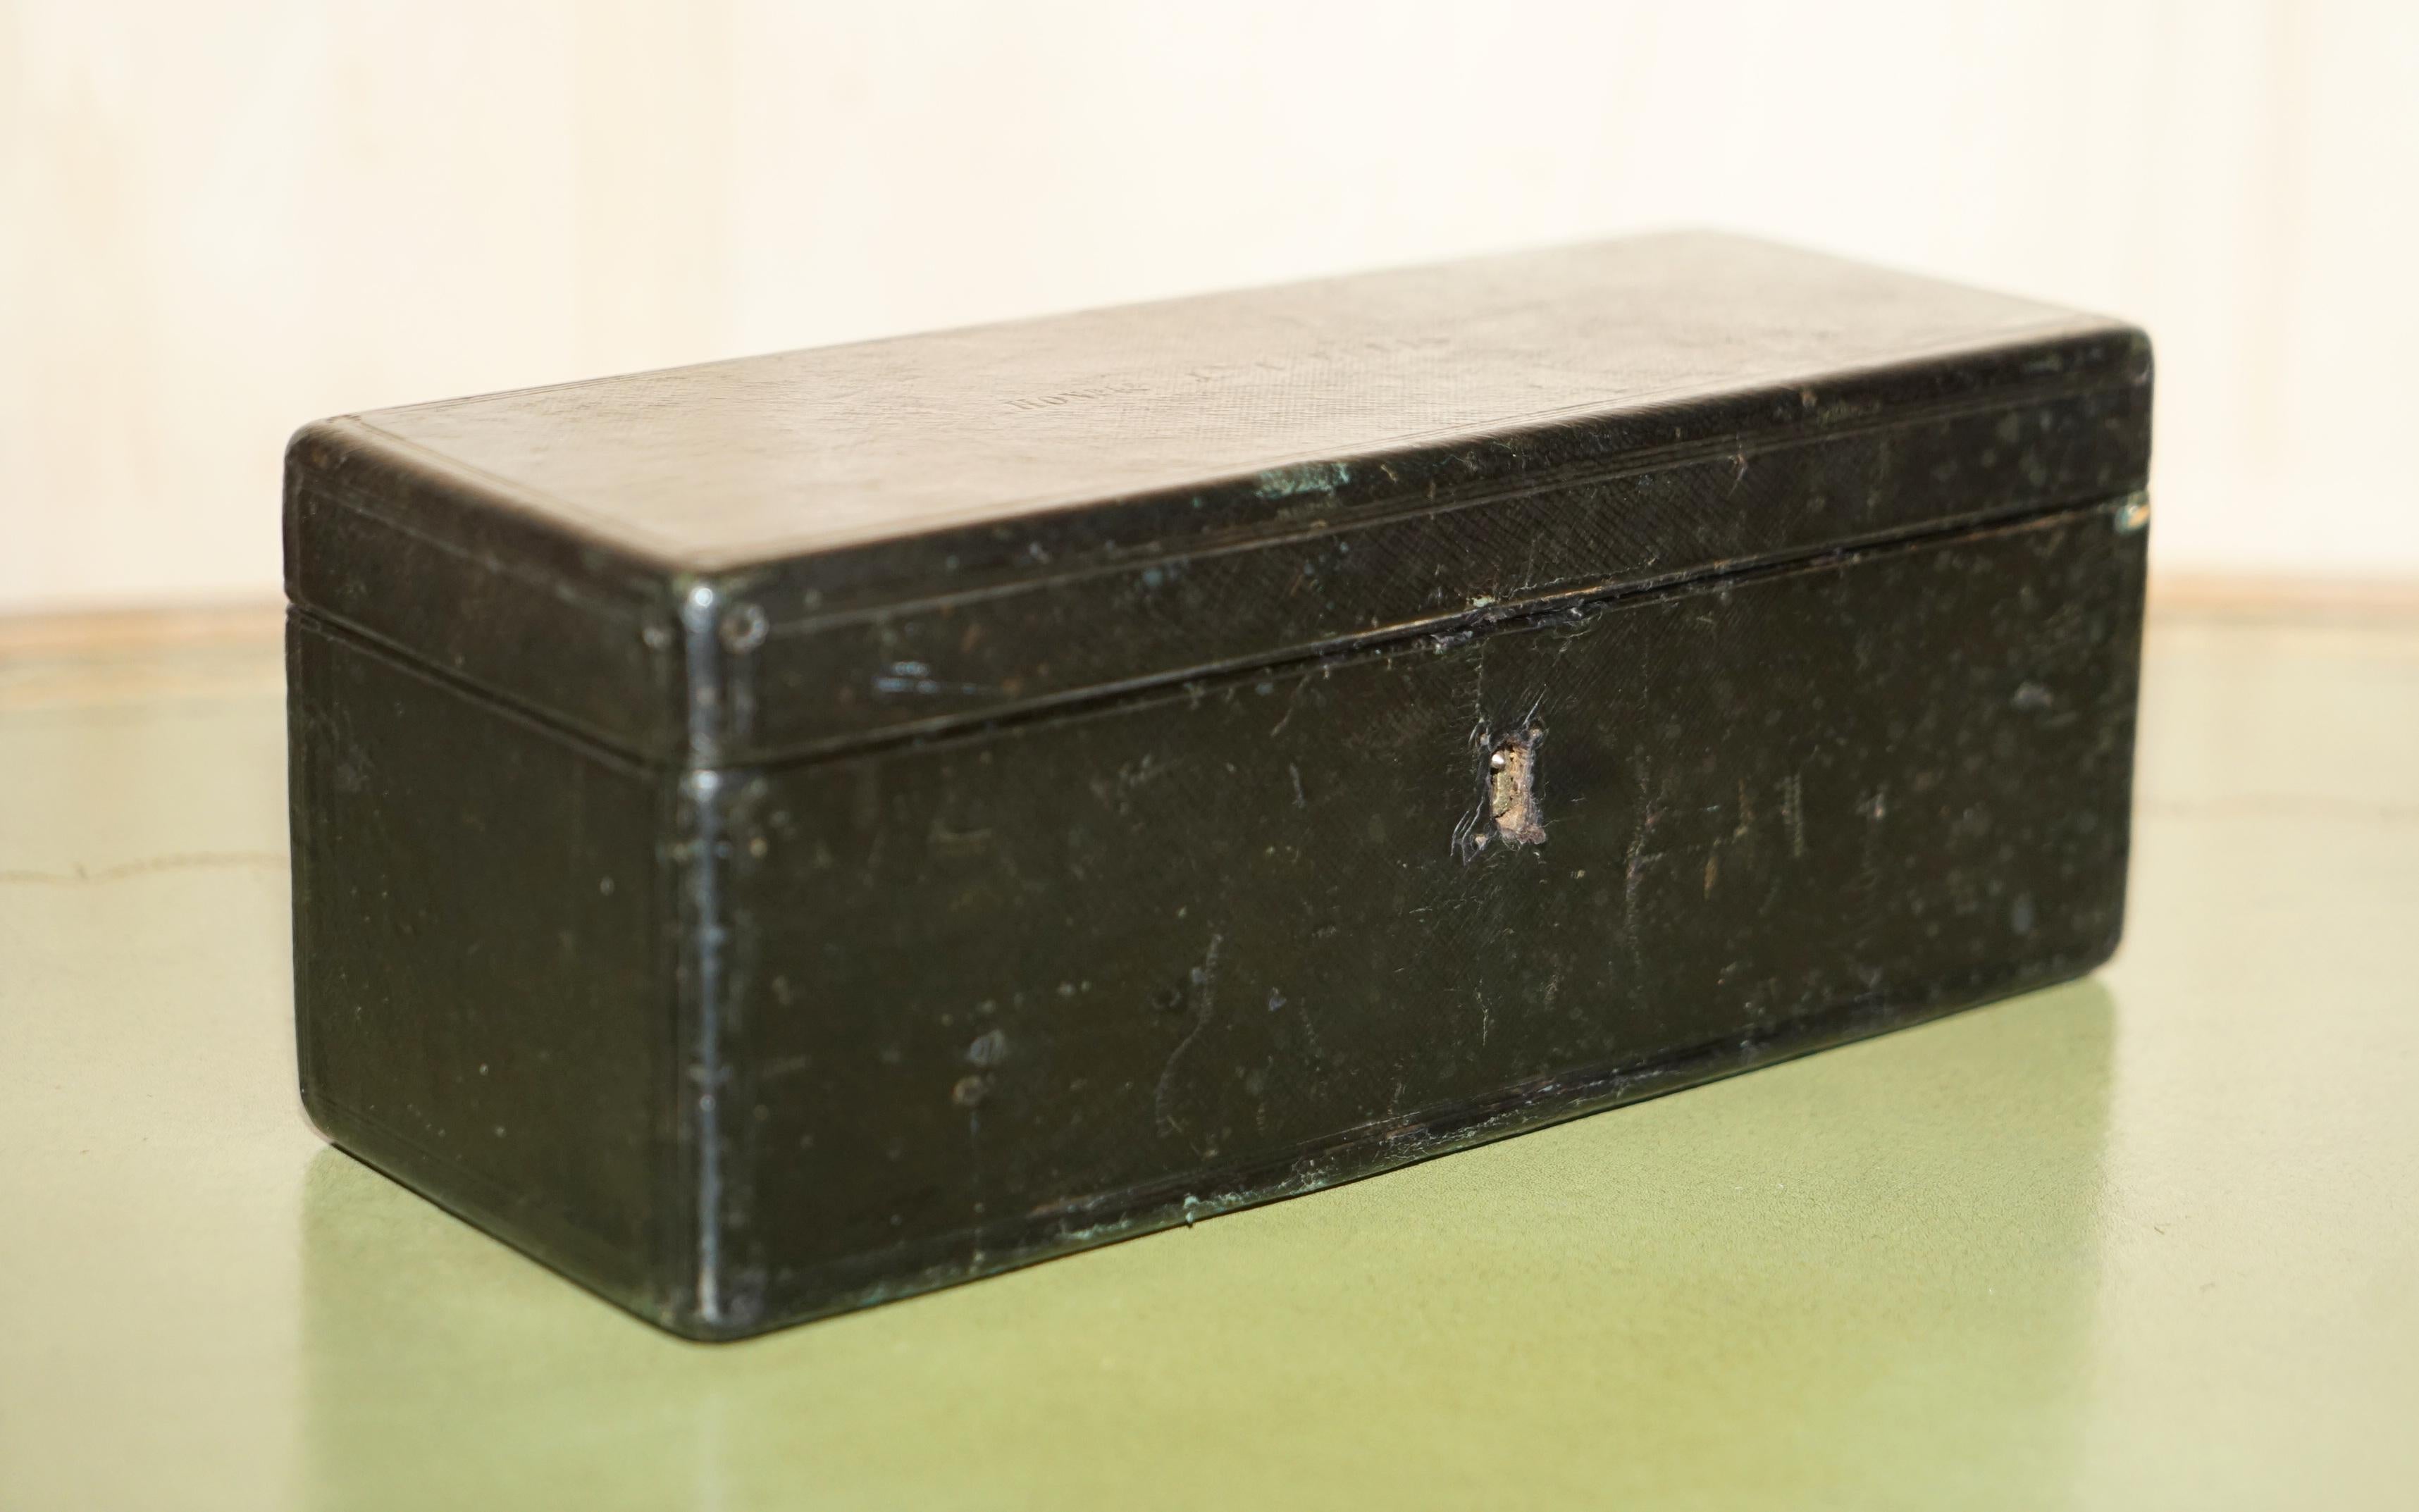 We are delighted to offer for sale this very rare small box of 27 Georgian keys of great importance

The box is stamped to the top “Honble J.A Ellis” and stamped on the inside “Manufactured to the Royal Family No1 St James Street”

Mr Ellis was